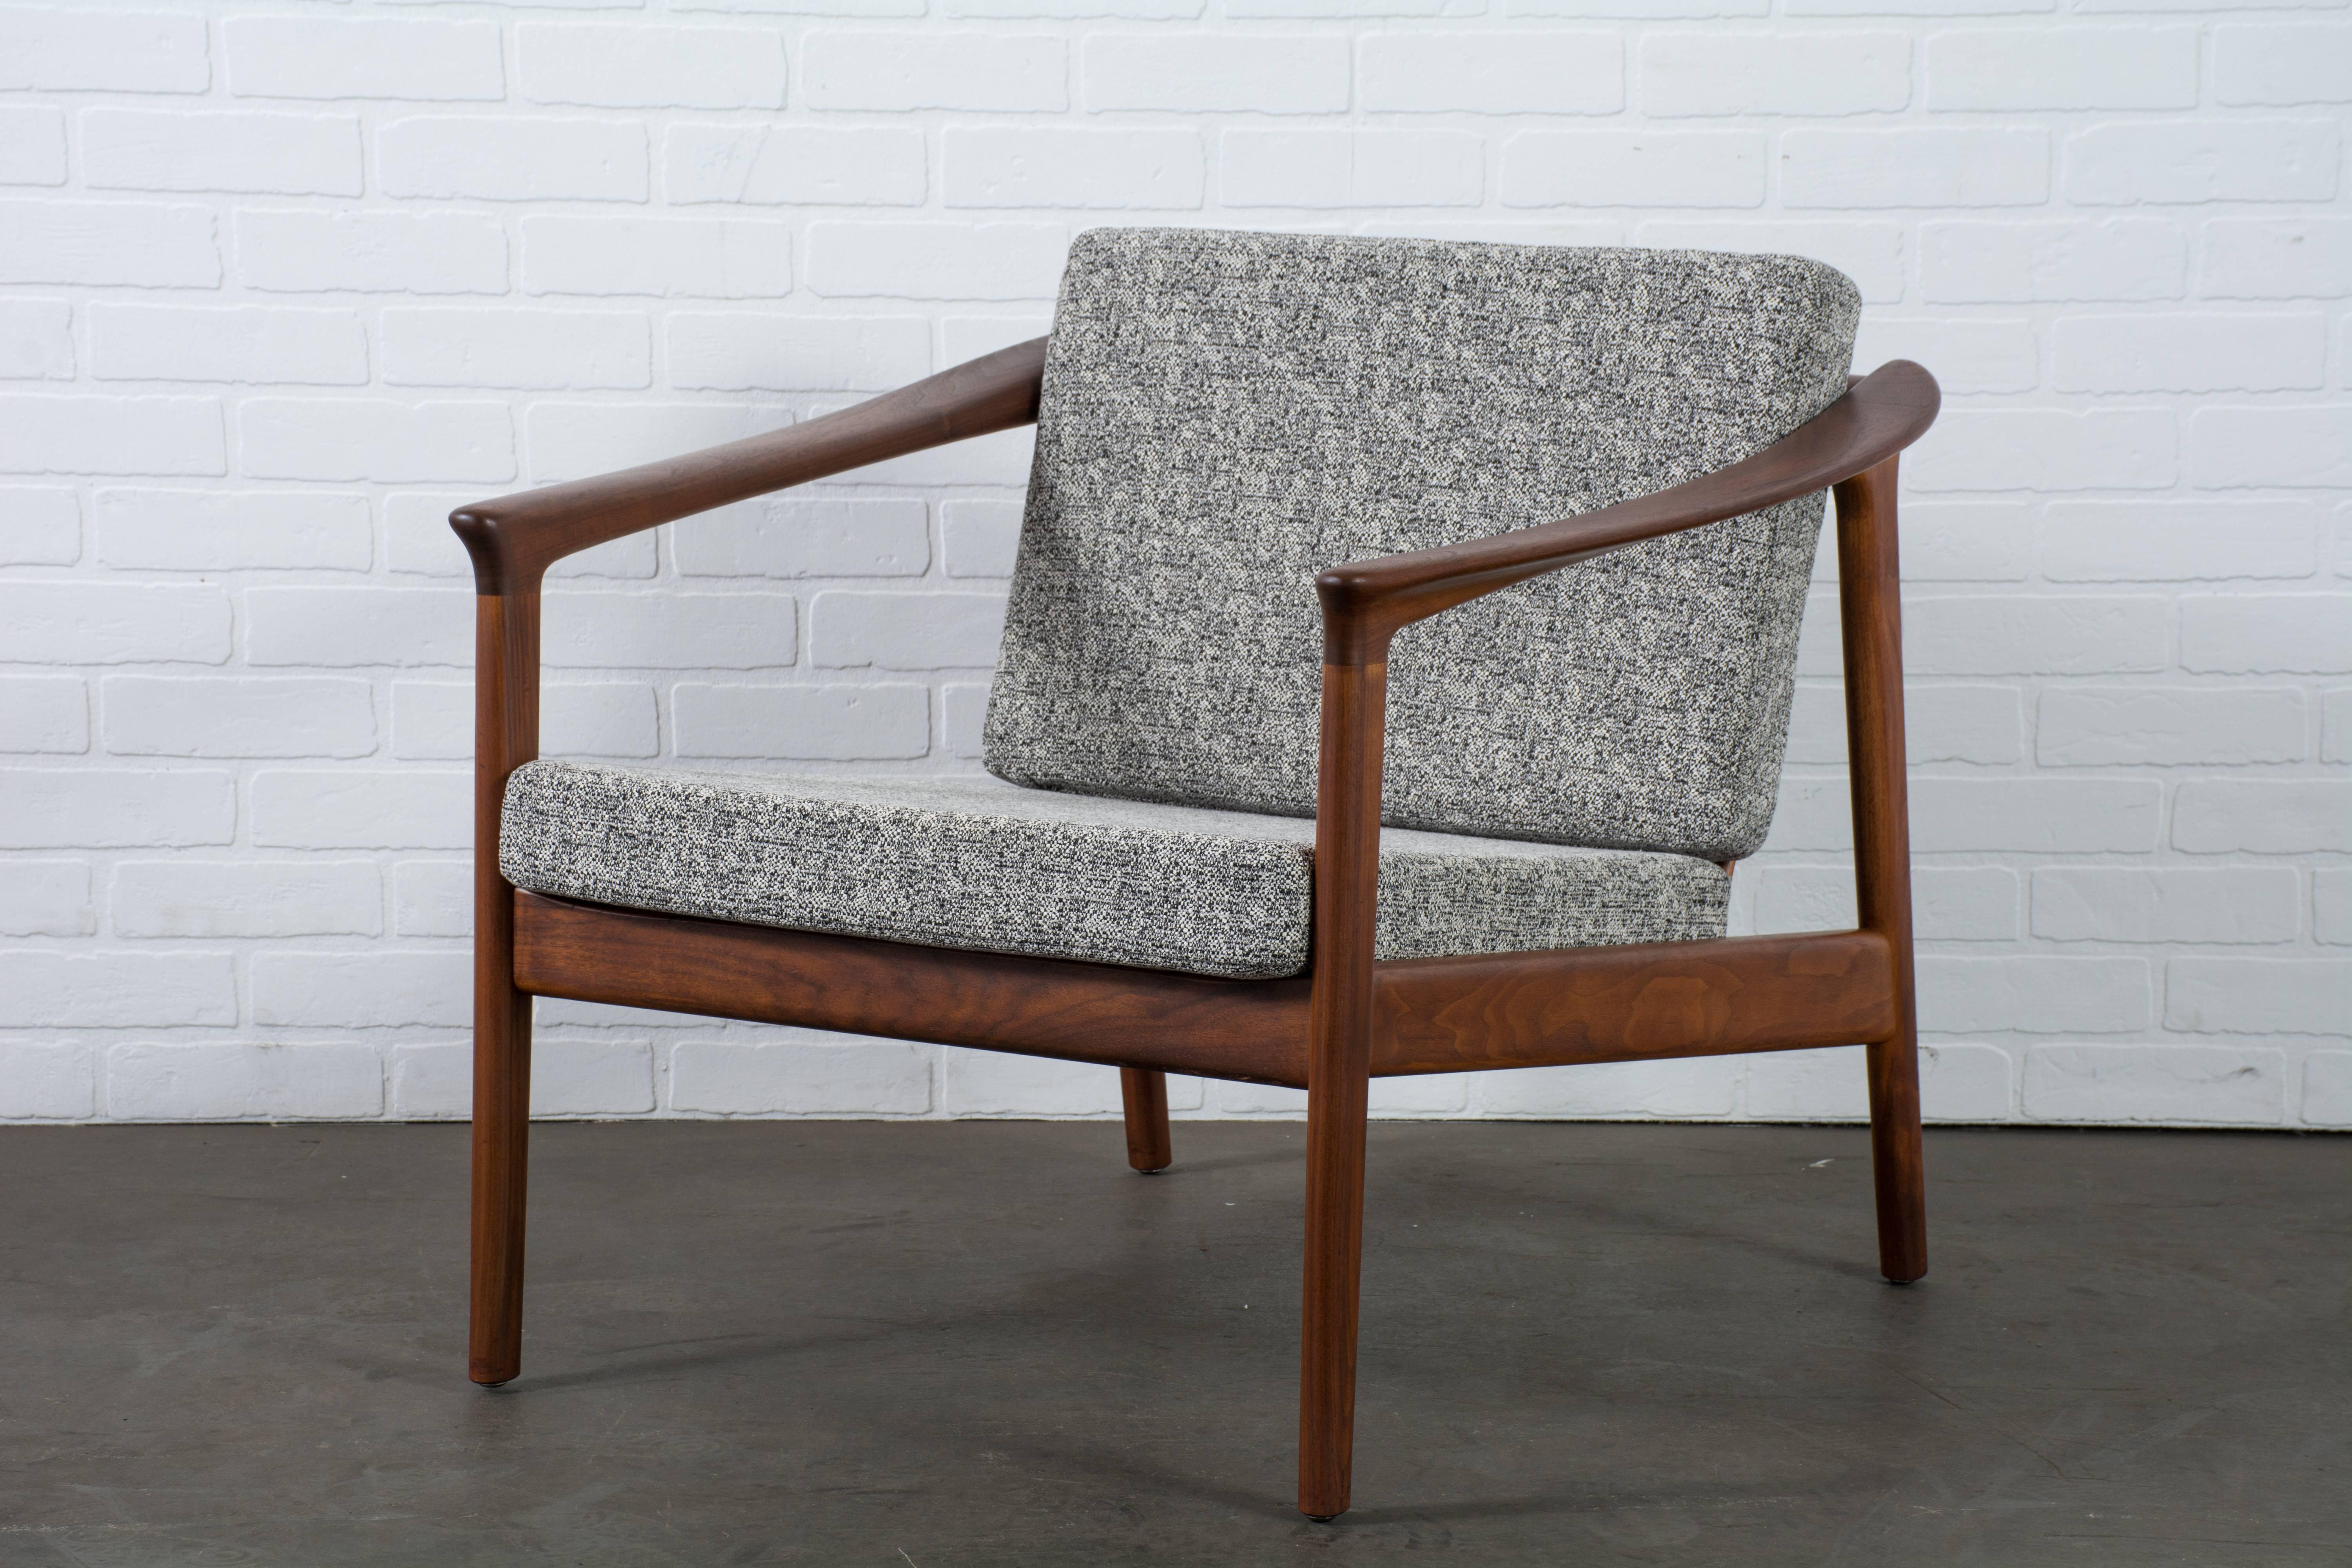 This Scandinavian Modern lounge chair was designed by Folke Ohlsson for DUX in the 1950s. It has a sculptural walnut frame and new cushions that have been upholstered in a black and white fabric. DUX label under the seat.